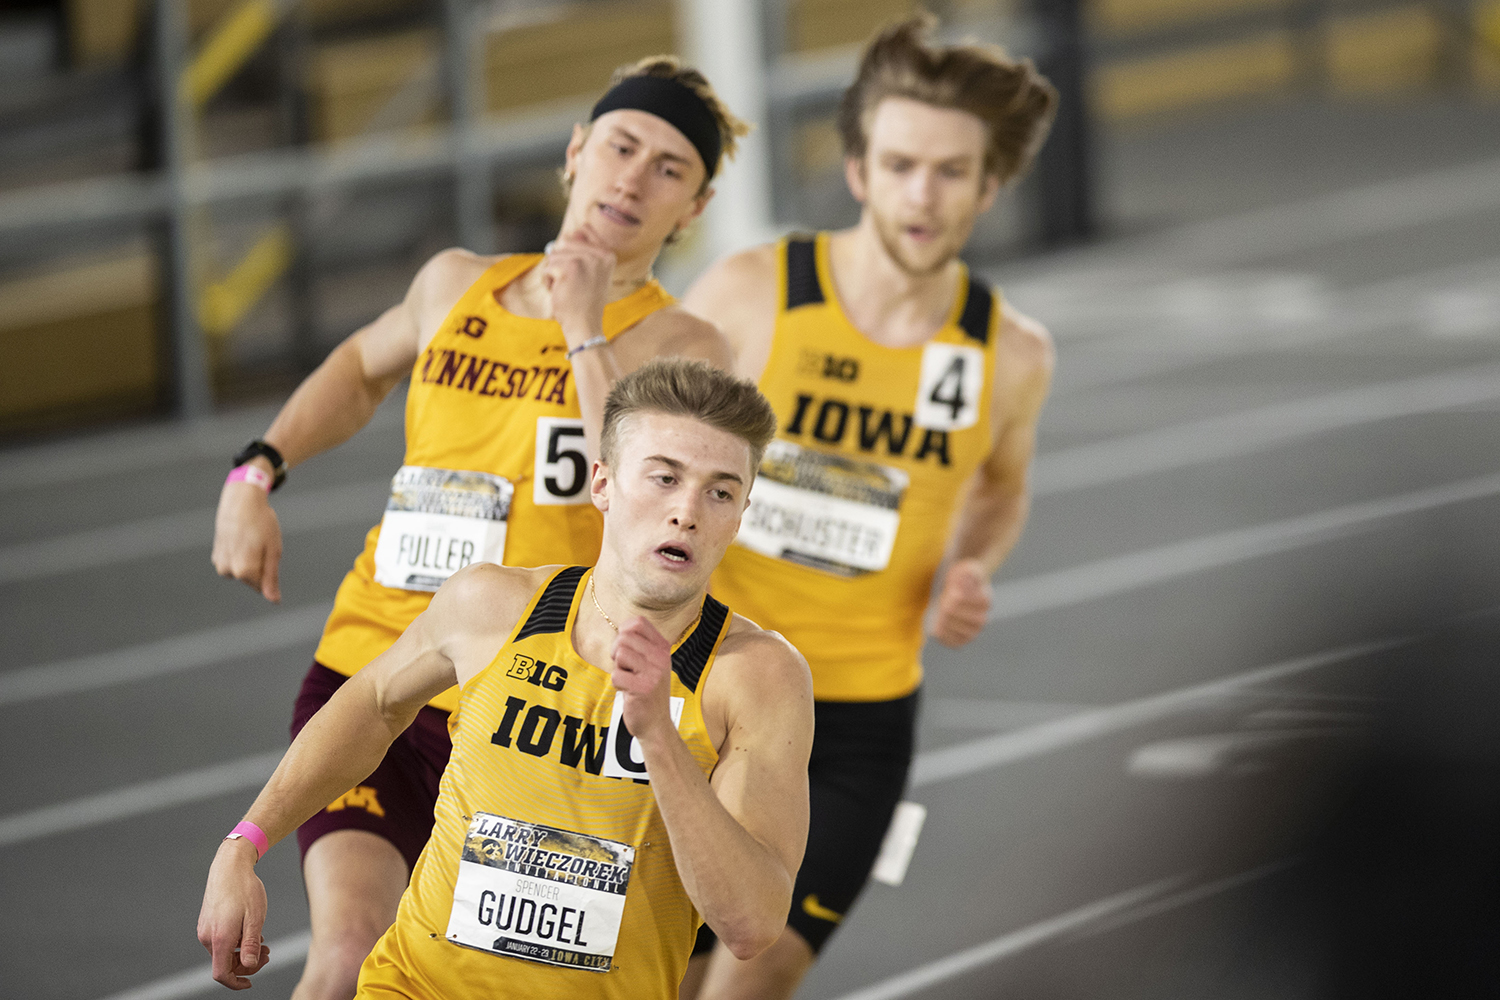 Iowa track and field set to compete at Billy Hayes Invitational The